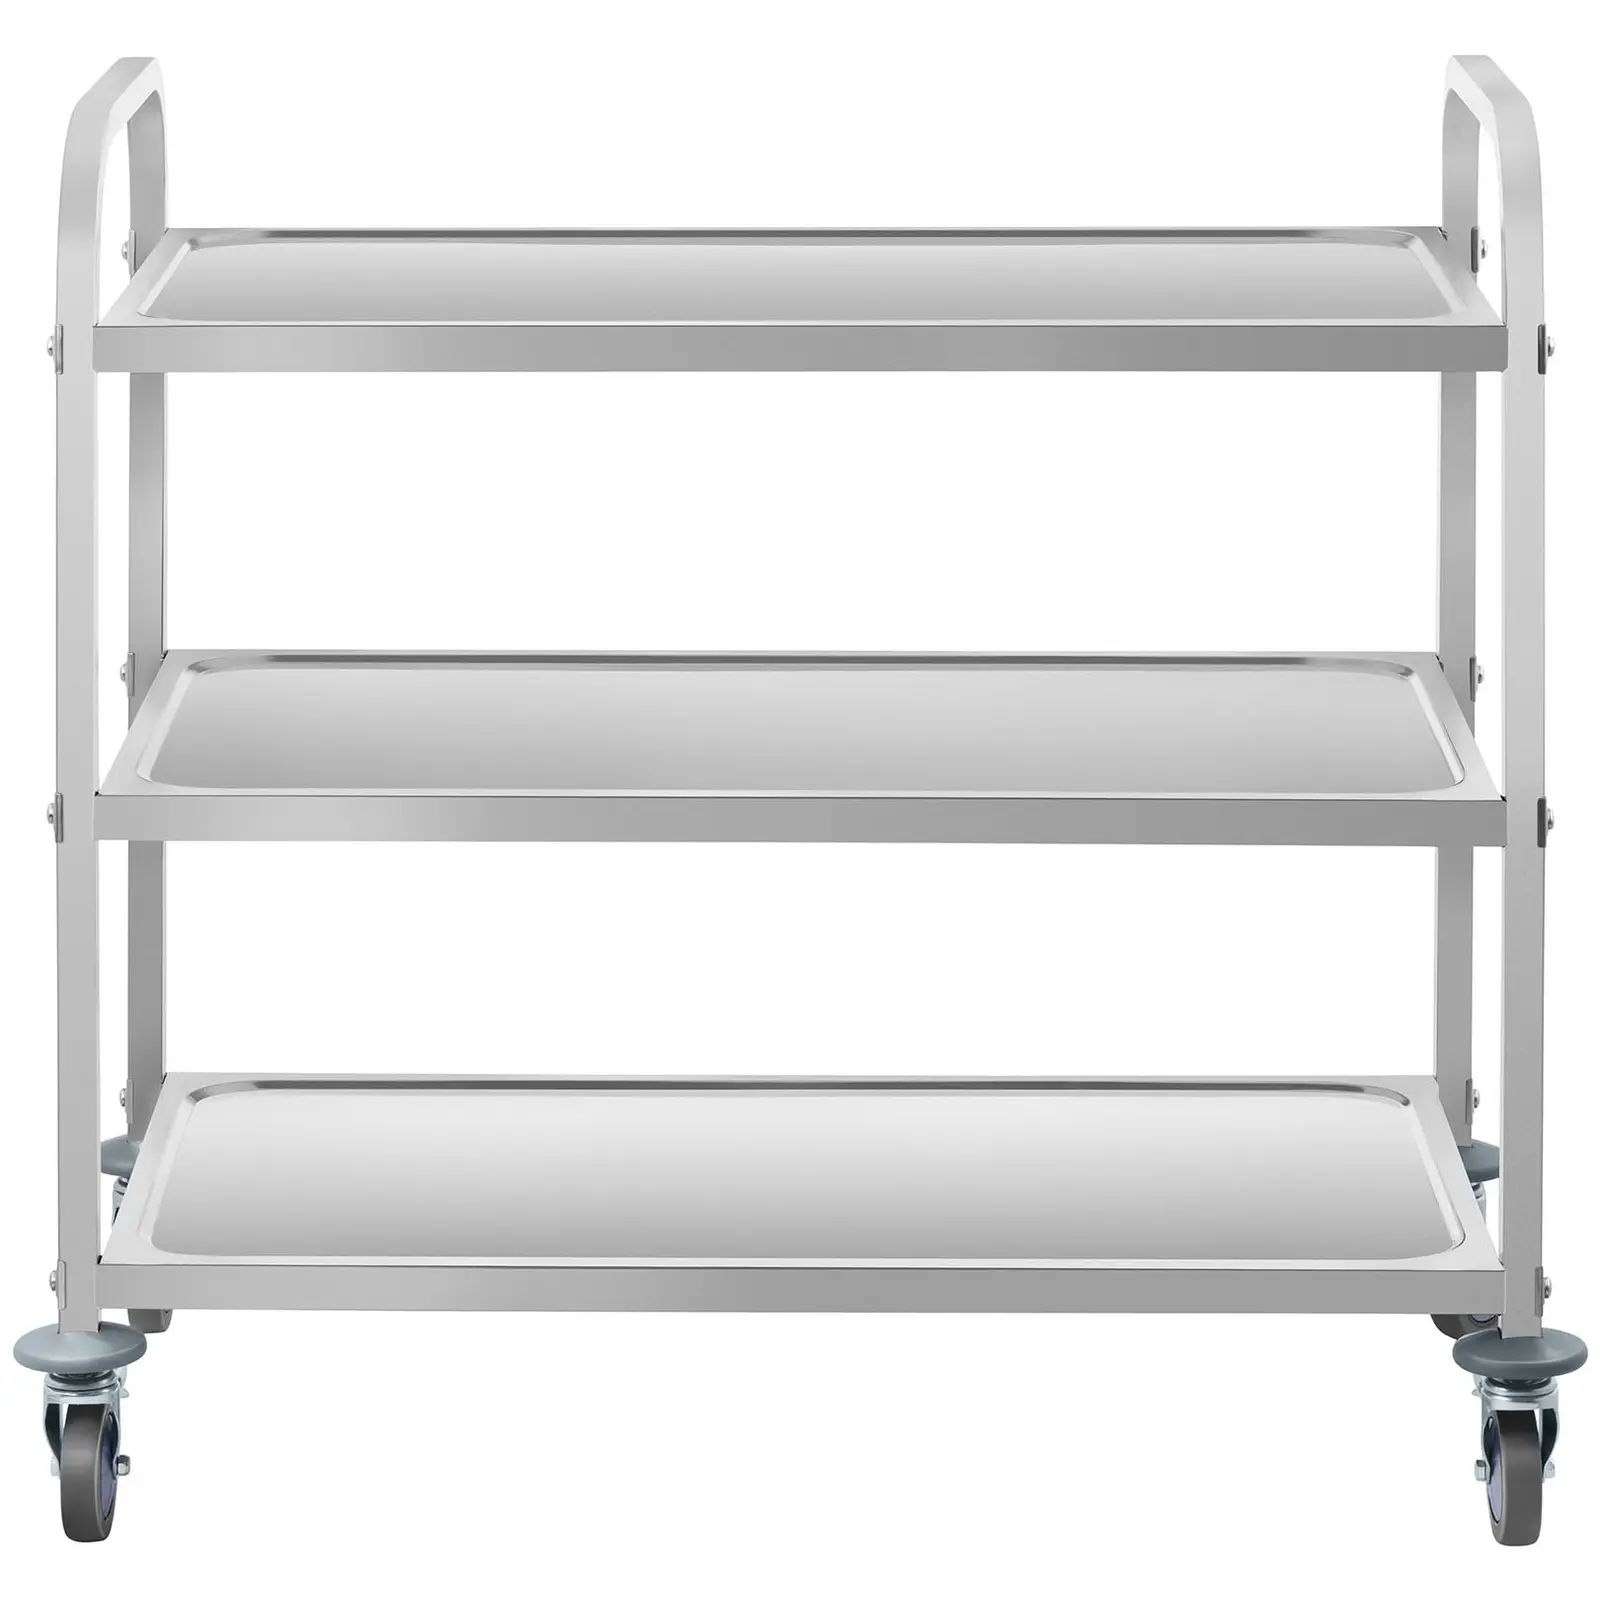 Serving Trolley - Stainless Steel - 3 Troughs - Up to 150 kg - 2 Brakes